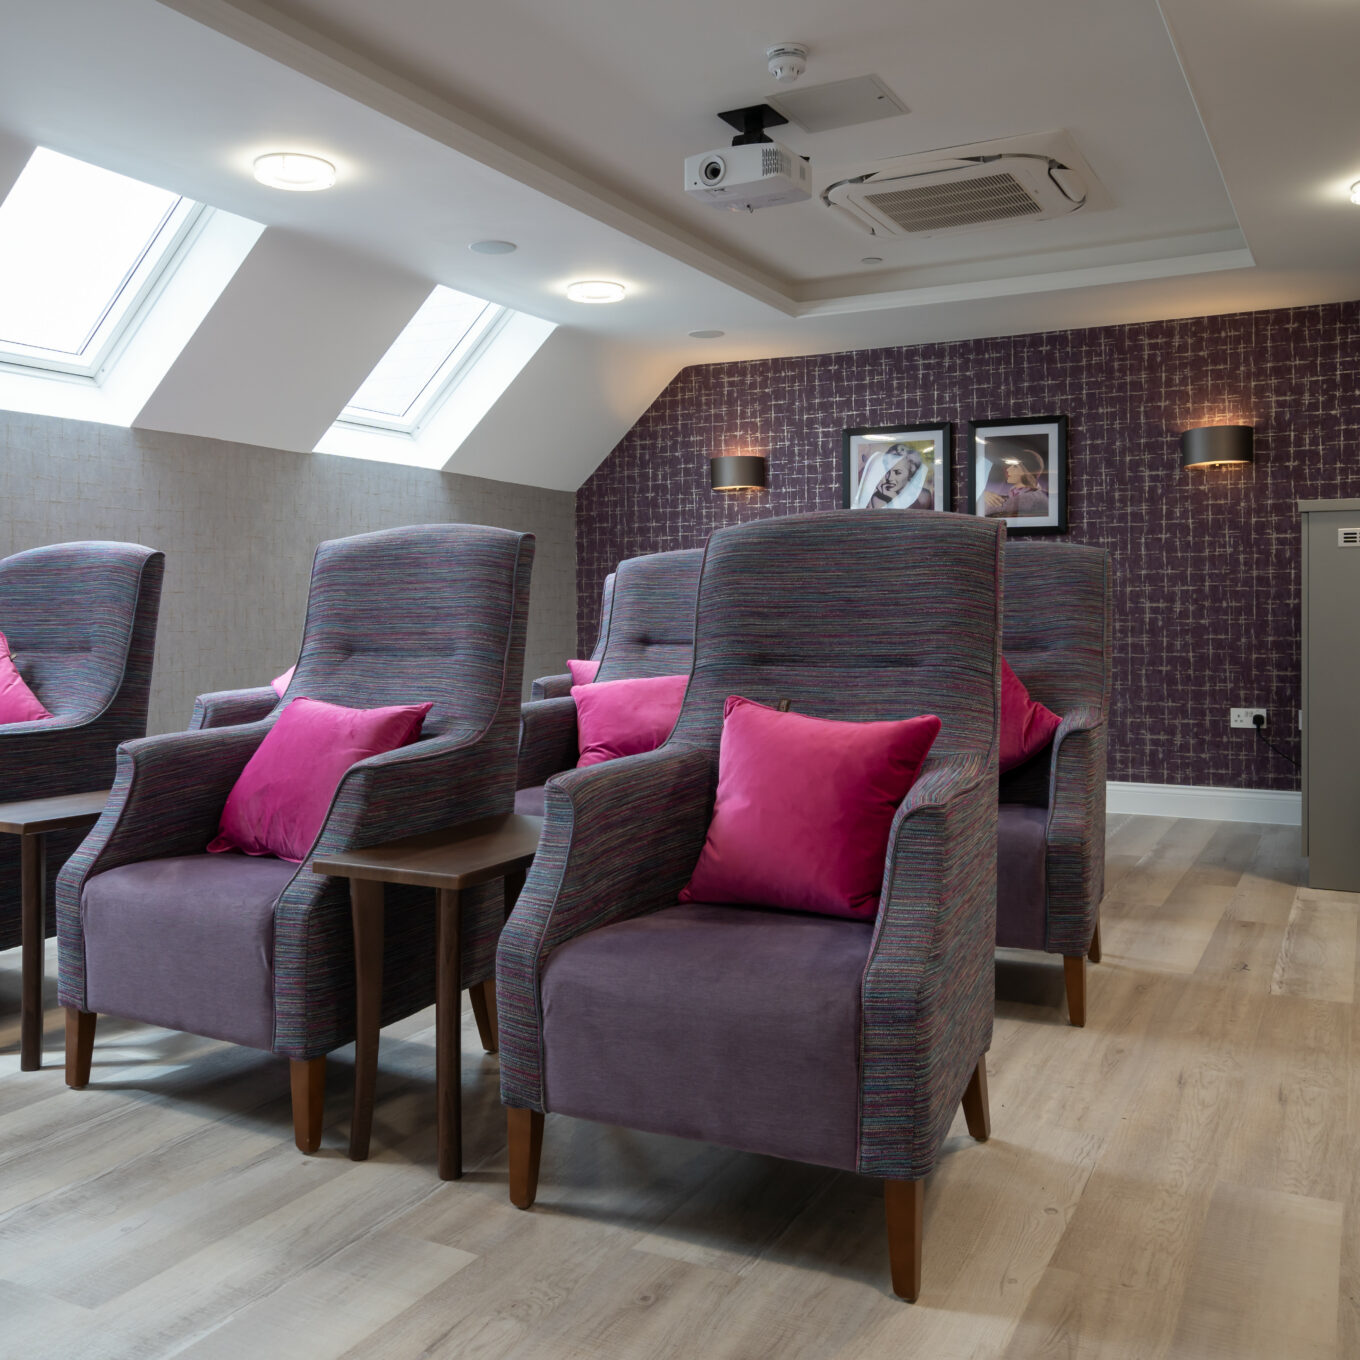 Cinema room chairs and projector at Elmbrook Court Care Home